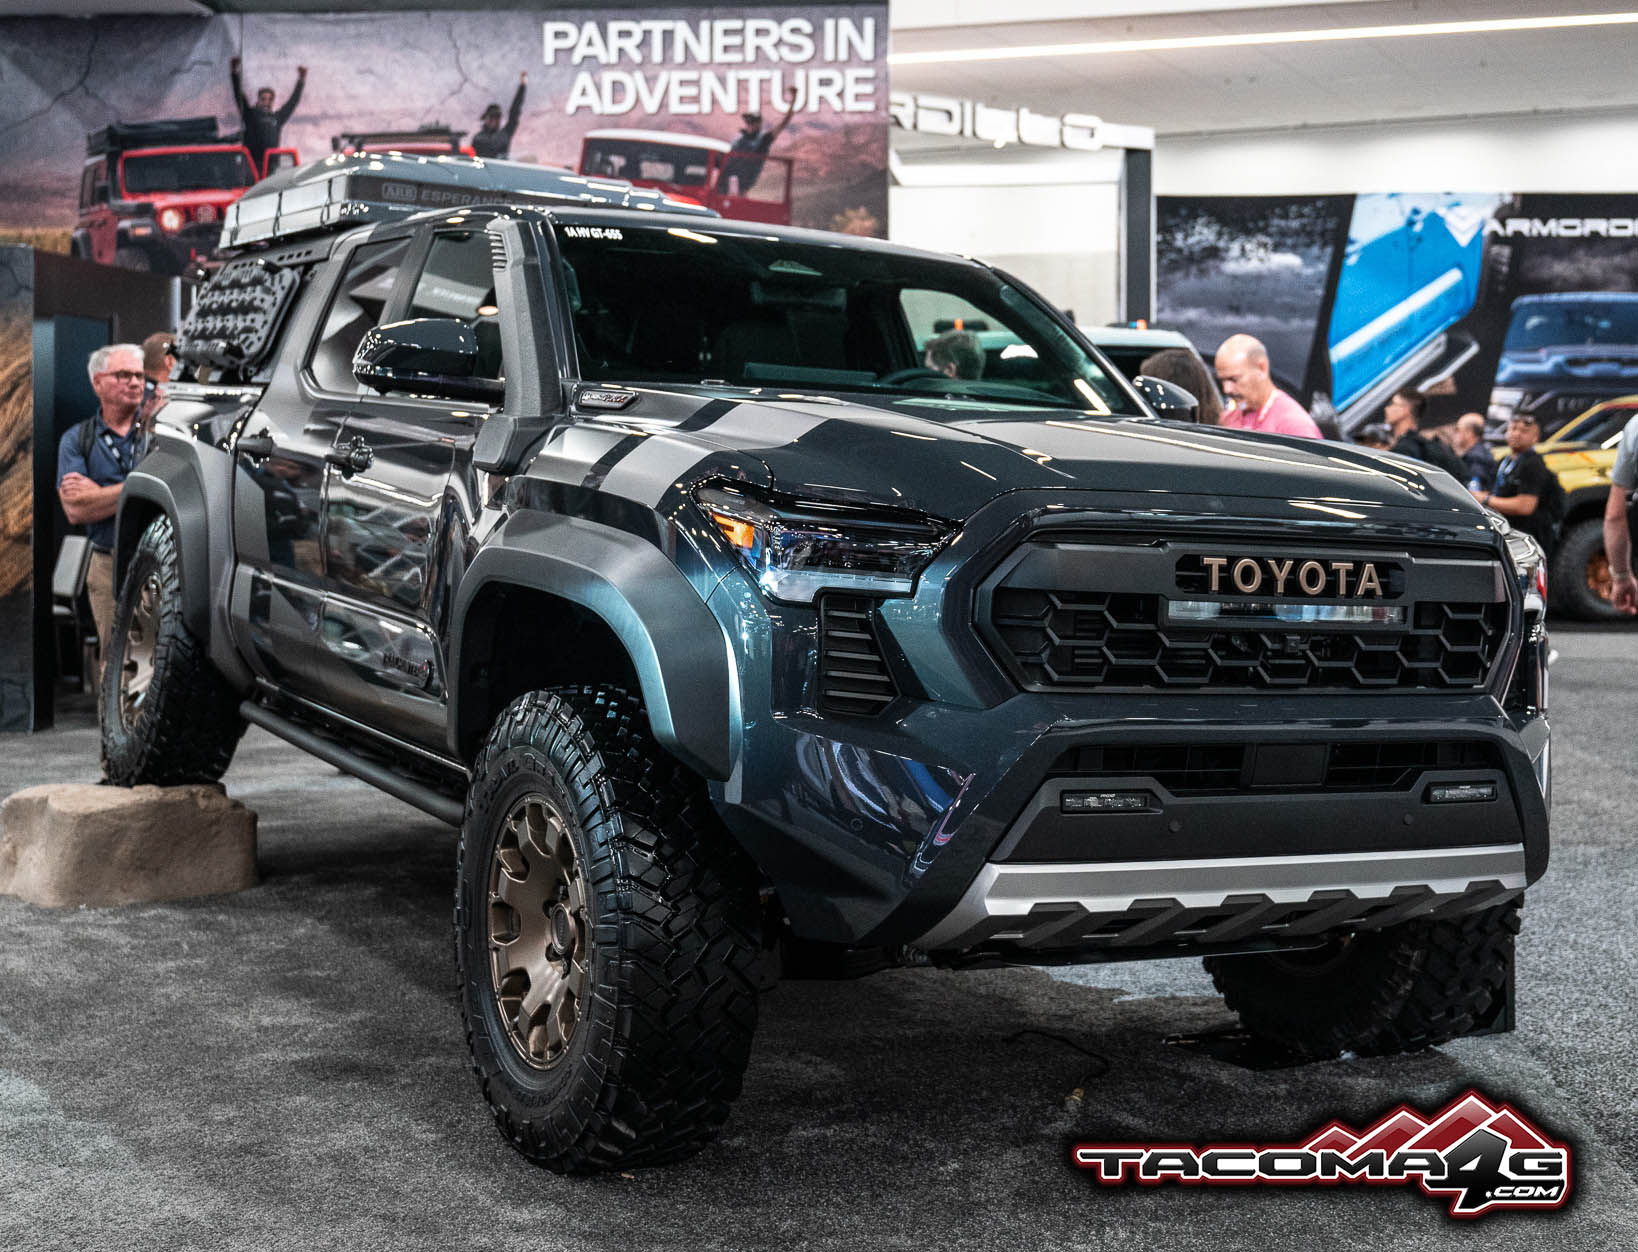 2024 Tacoma Official UNDERGROUND 2024 Tacoma Thread (4th Gen) ARB 2024 Tacoma Trailhunter Build Underground Color